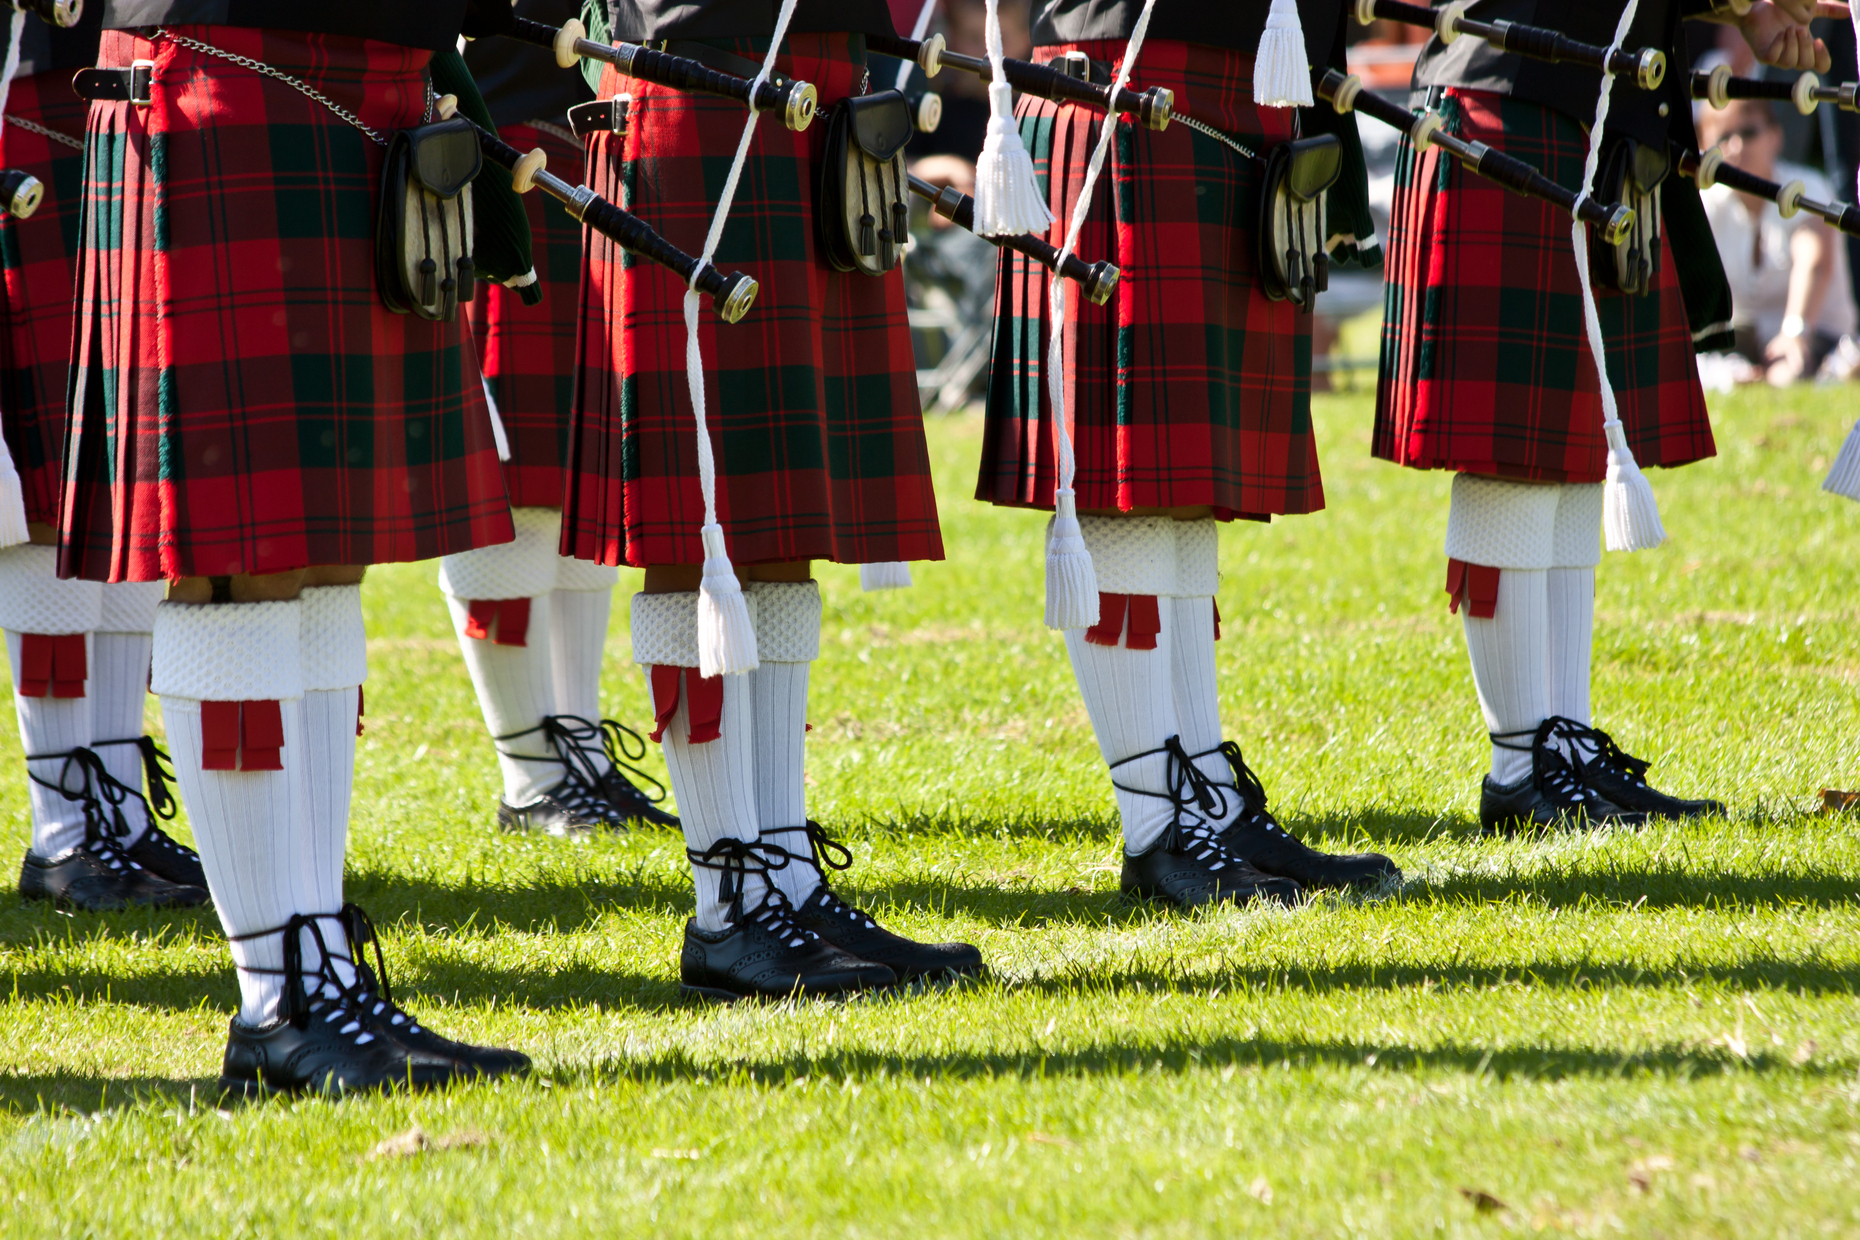 Enjoy several important cultural events when visiting Scotland between May and September. More than 60 <a href="https://scotlandwelcomesyou.com/scottish-highland-games/" rel="noreferrer noopener">Highlands Games</a> are held across the country, giving locals and tourists alike a chance to show off their clan colours in a series of fun, sporting, and traditional events. In August, both the <a href="https://www.edfringe.com/" rel="noreferrer noopener">Fringe Festival</a> and events surrounding the bagpipes and kilts of the <a href="https://www.edintattoo.co.uk/" rel="noreferrer noopener">Royal Edinburgh Military Tattoo</a> take Edinburgh by storm.